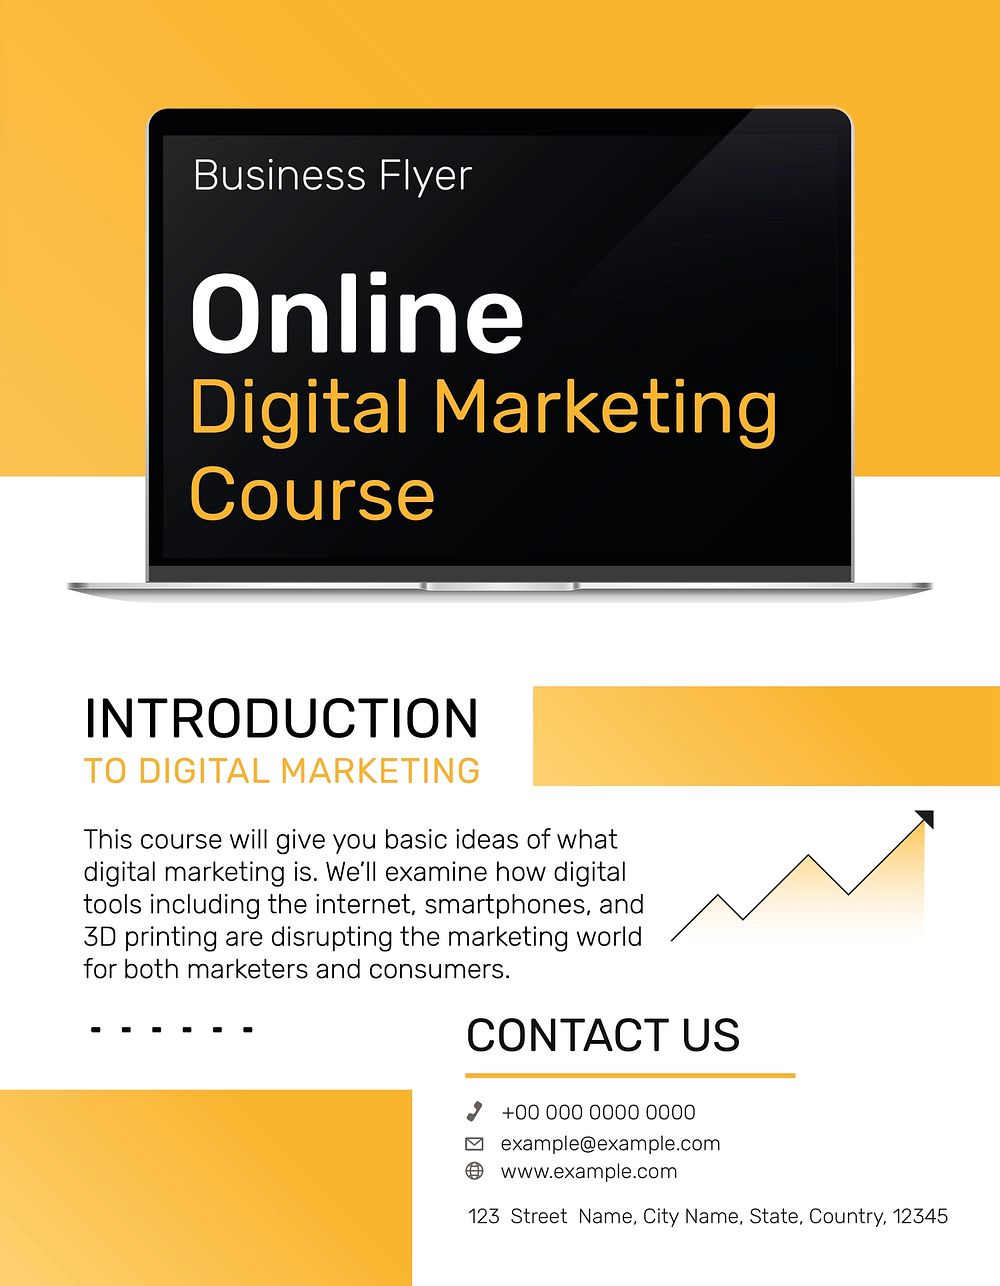 Digital marketing brochure template psd introduction for business